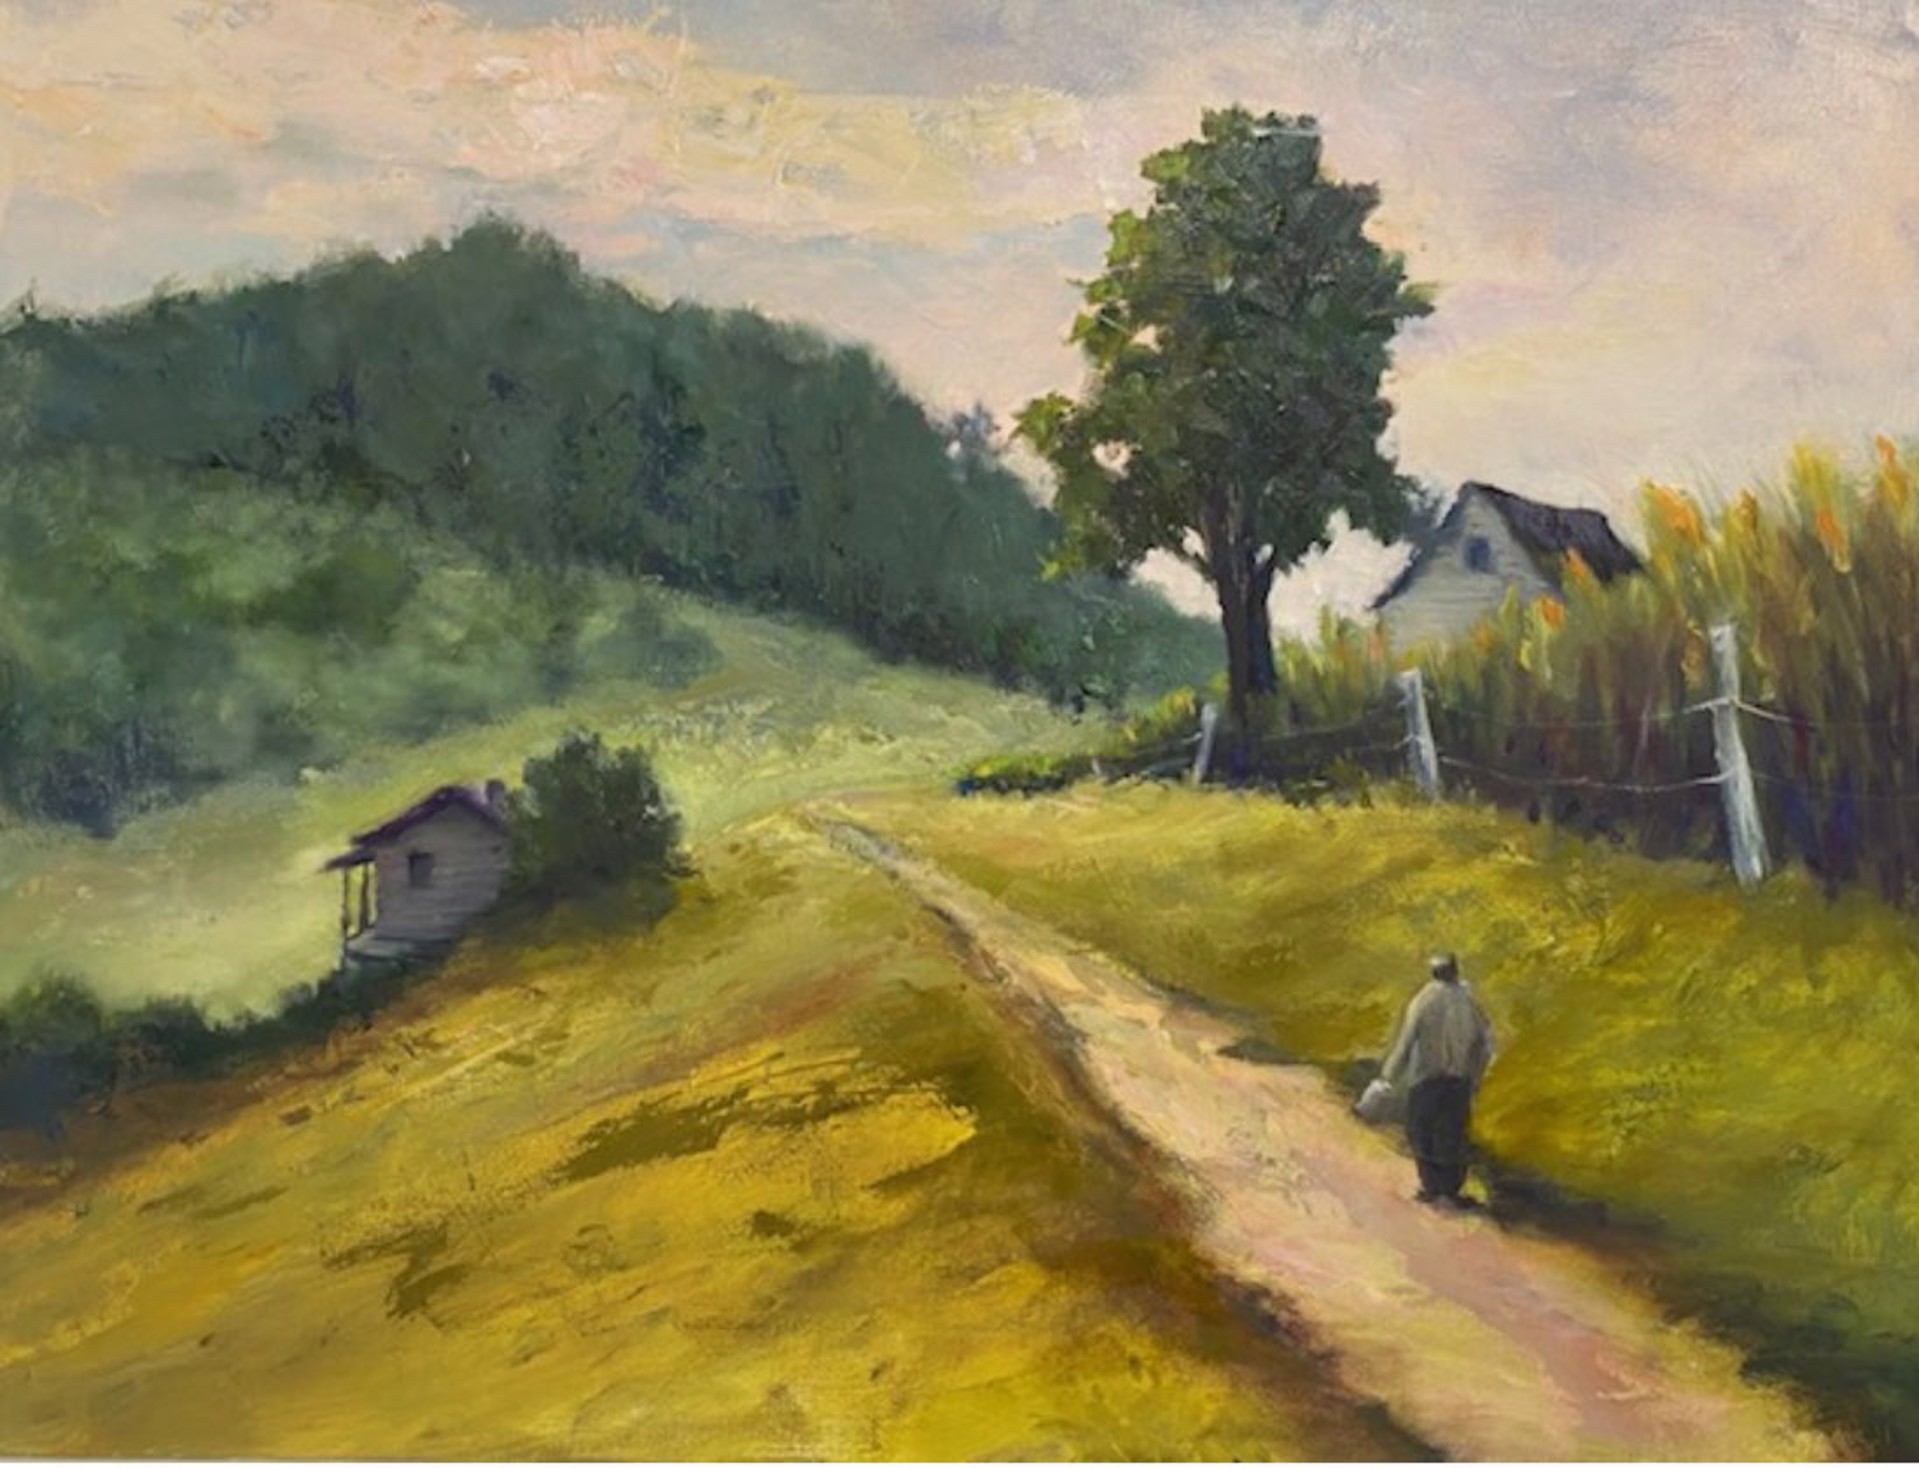 Home in the Holler by Mary Jane Huegel